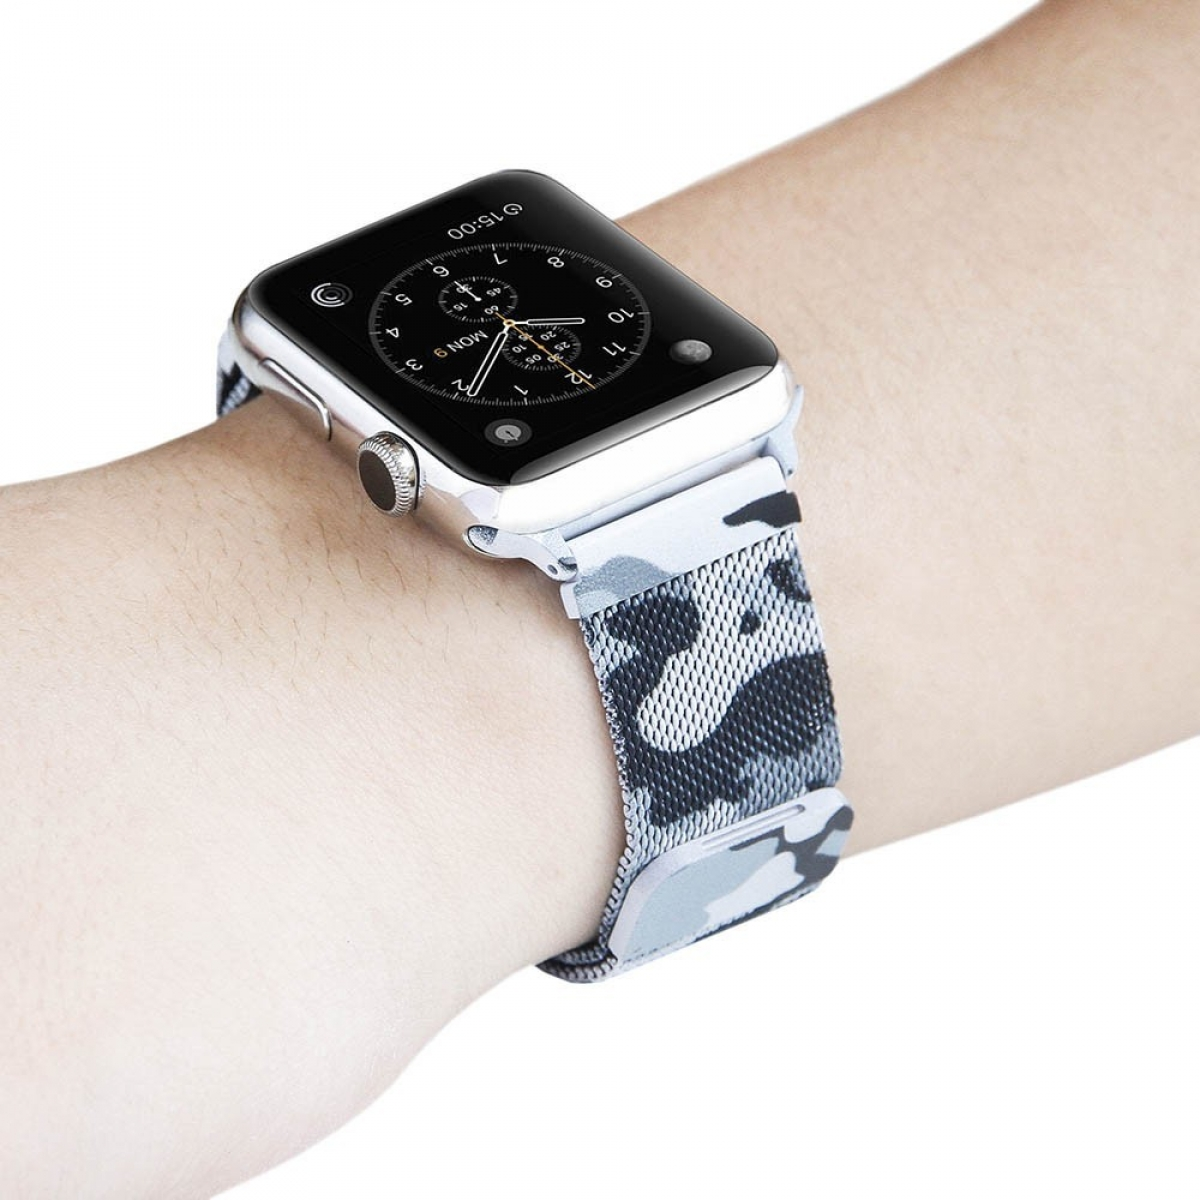 Milanaise 42mm, Multicolor Camouflage, Watch Apple, Smartband, CASEONLINE